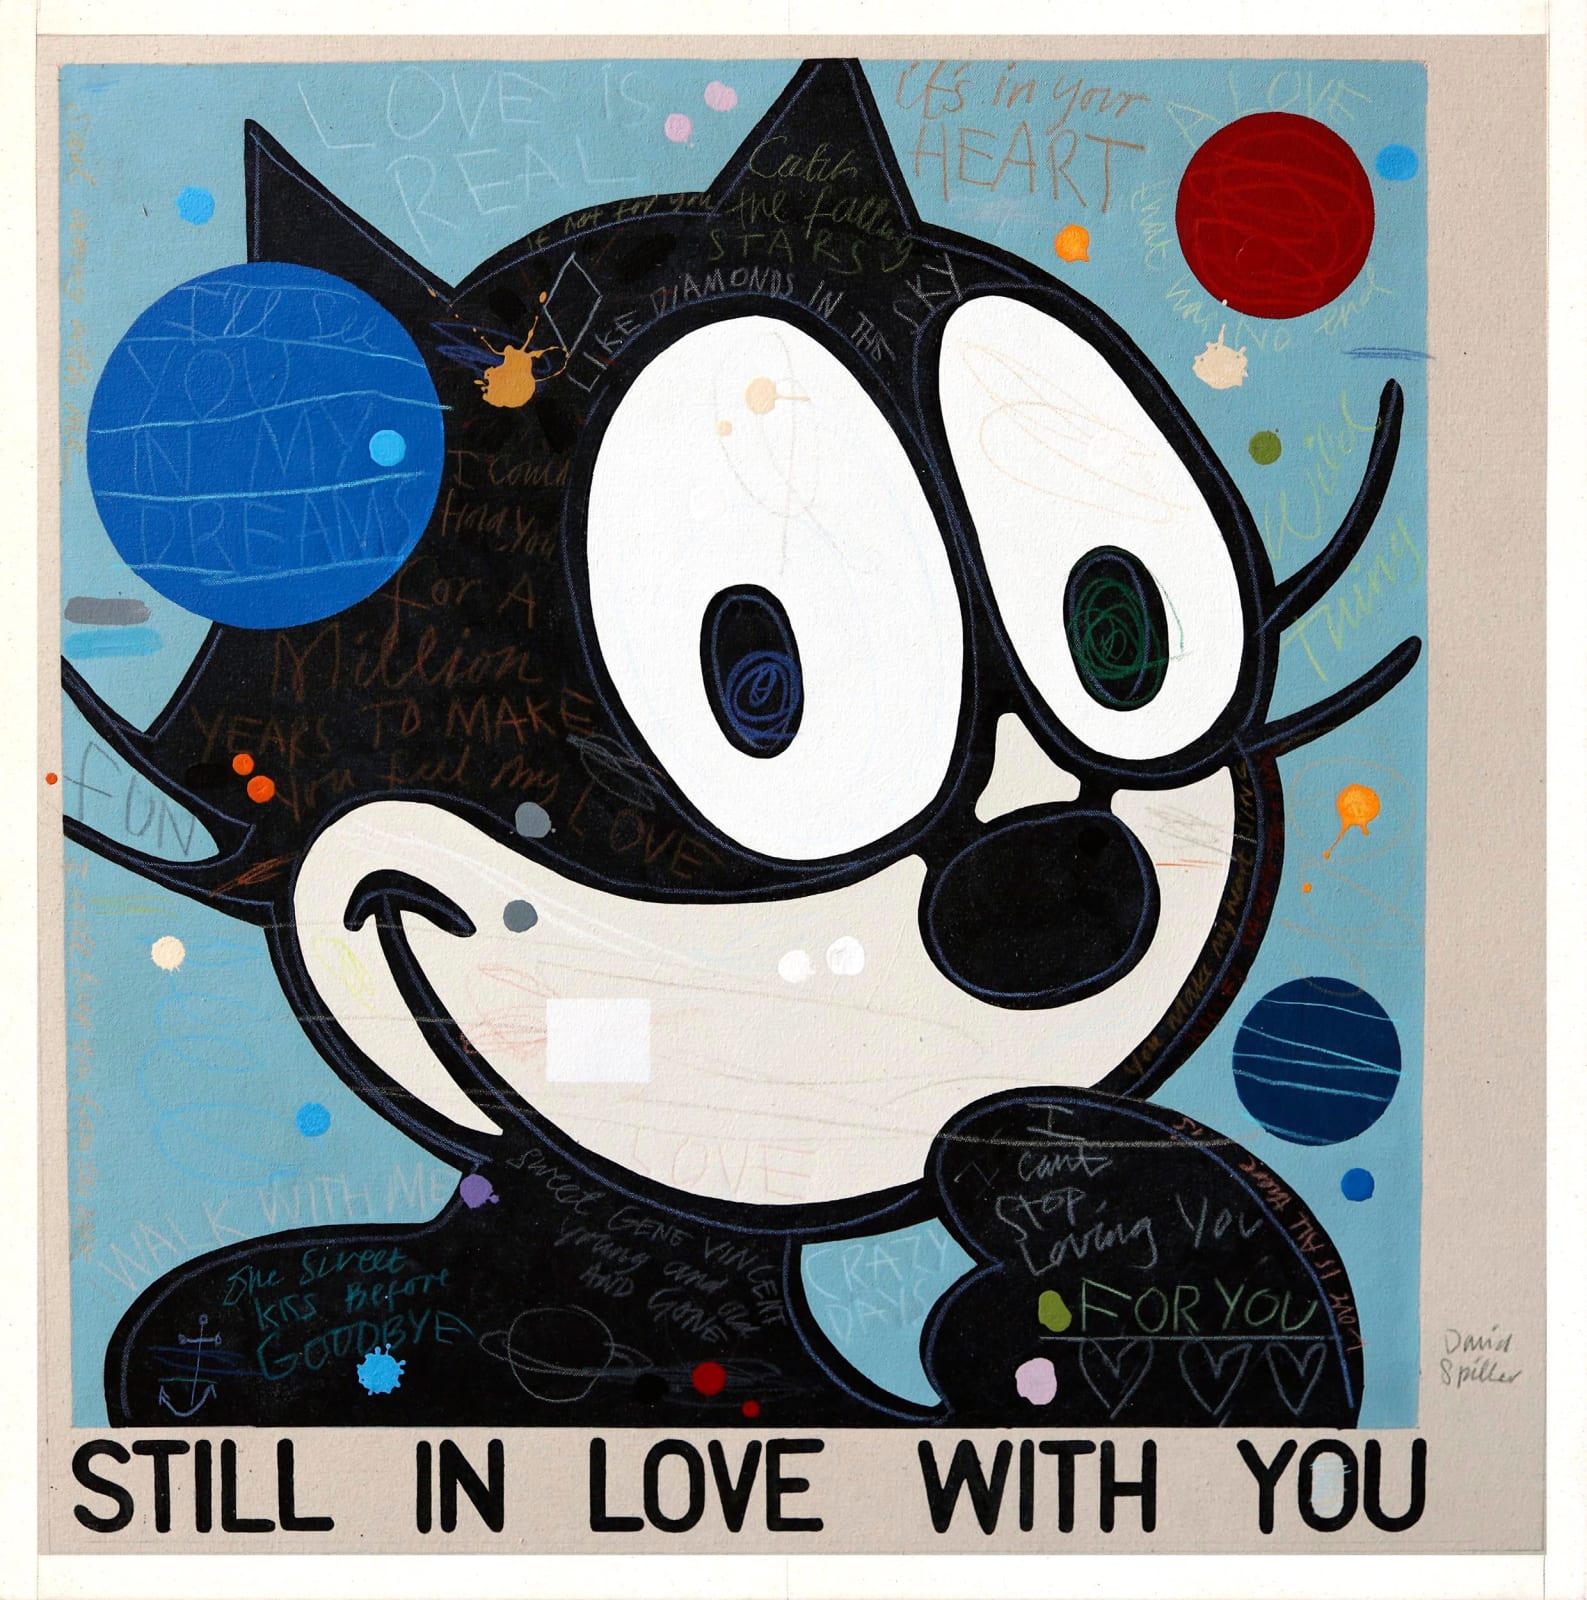 David Spiller, Still in love with you, 2015